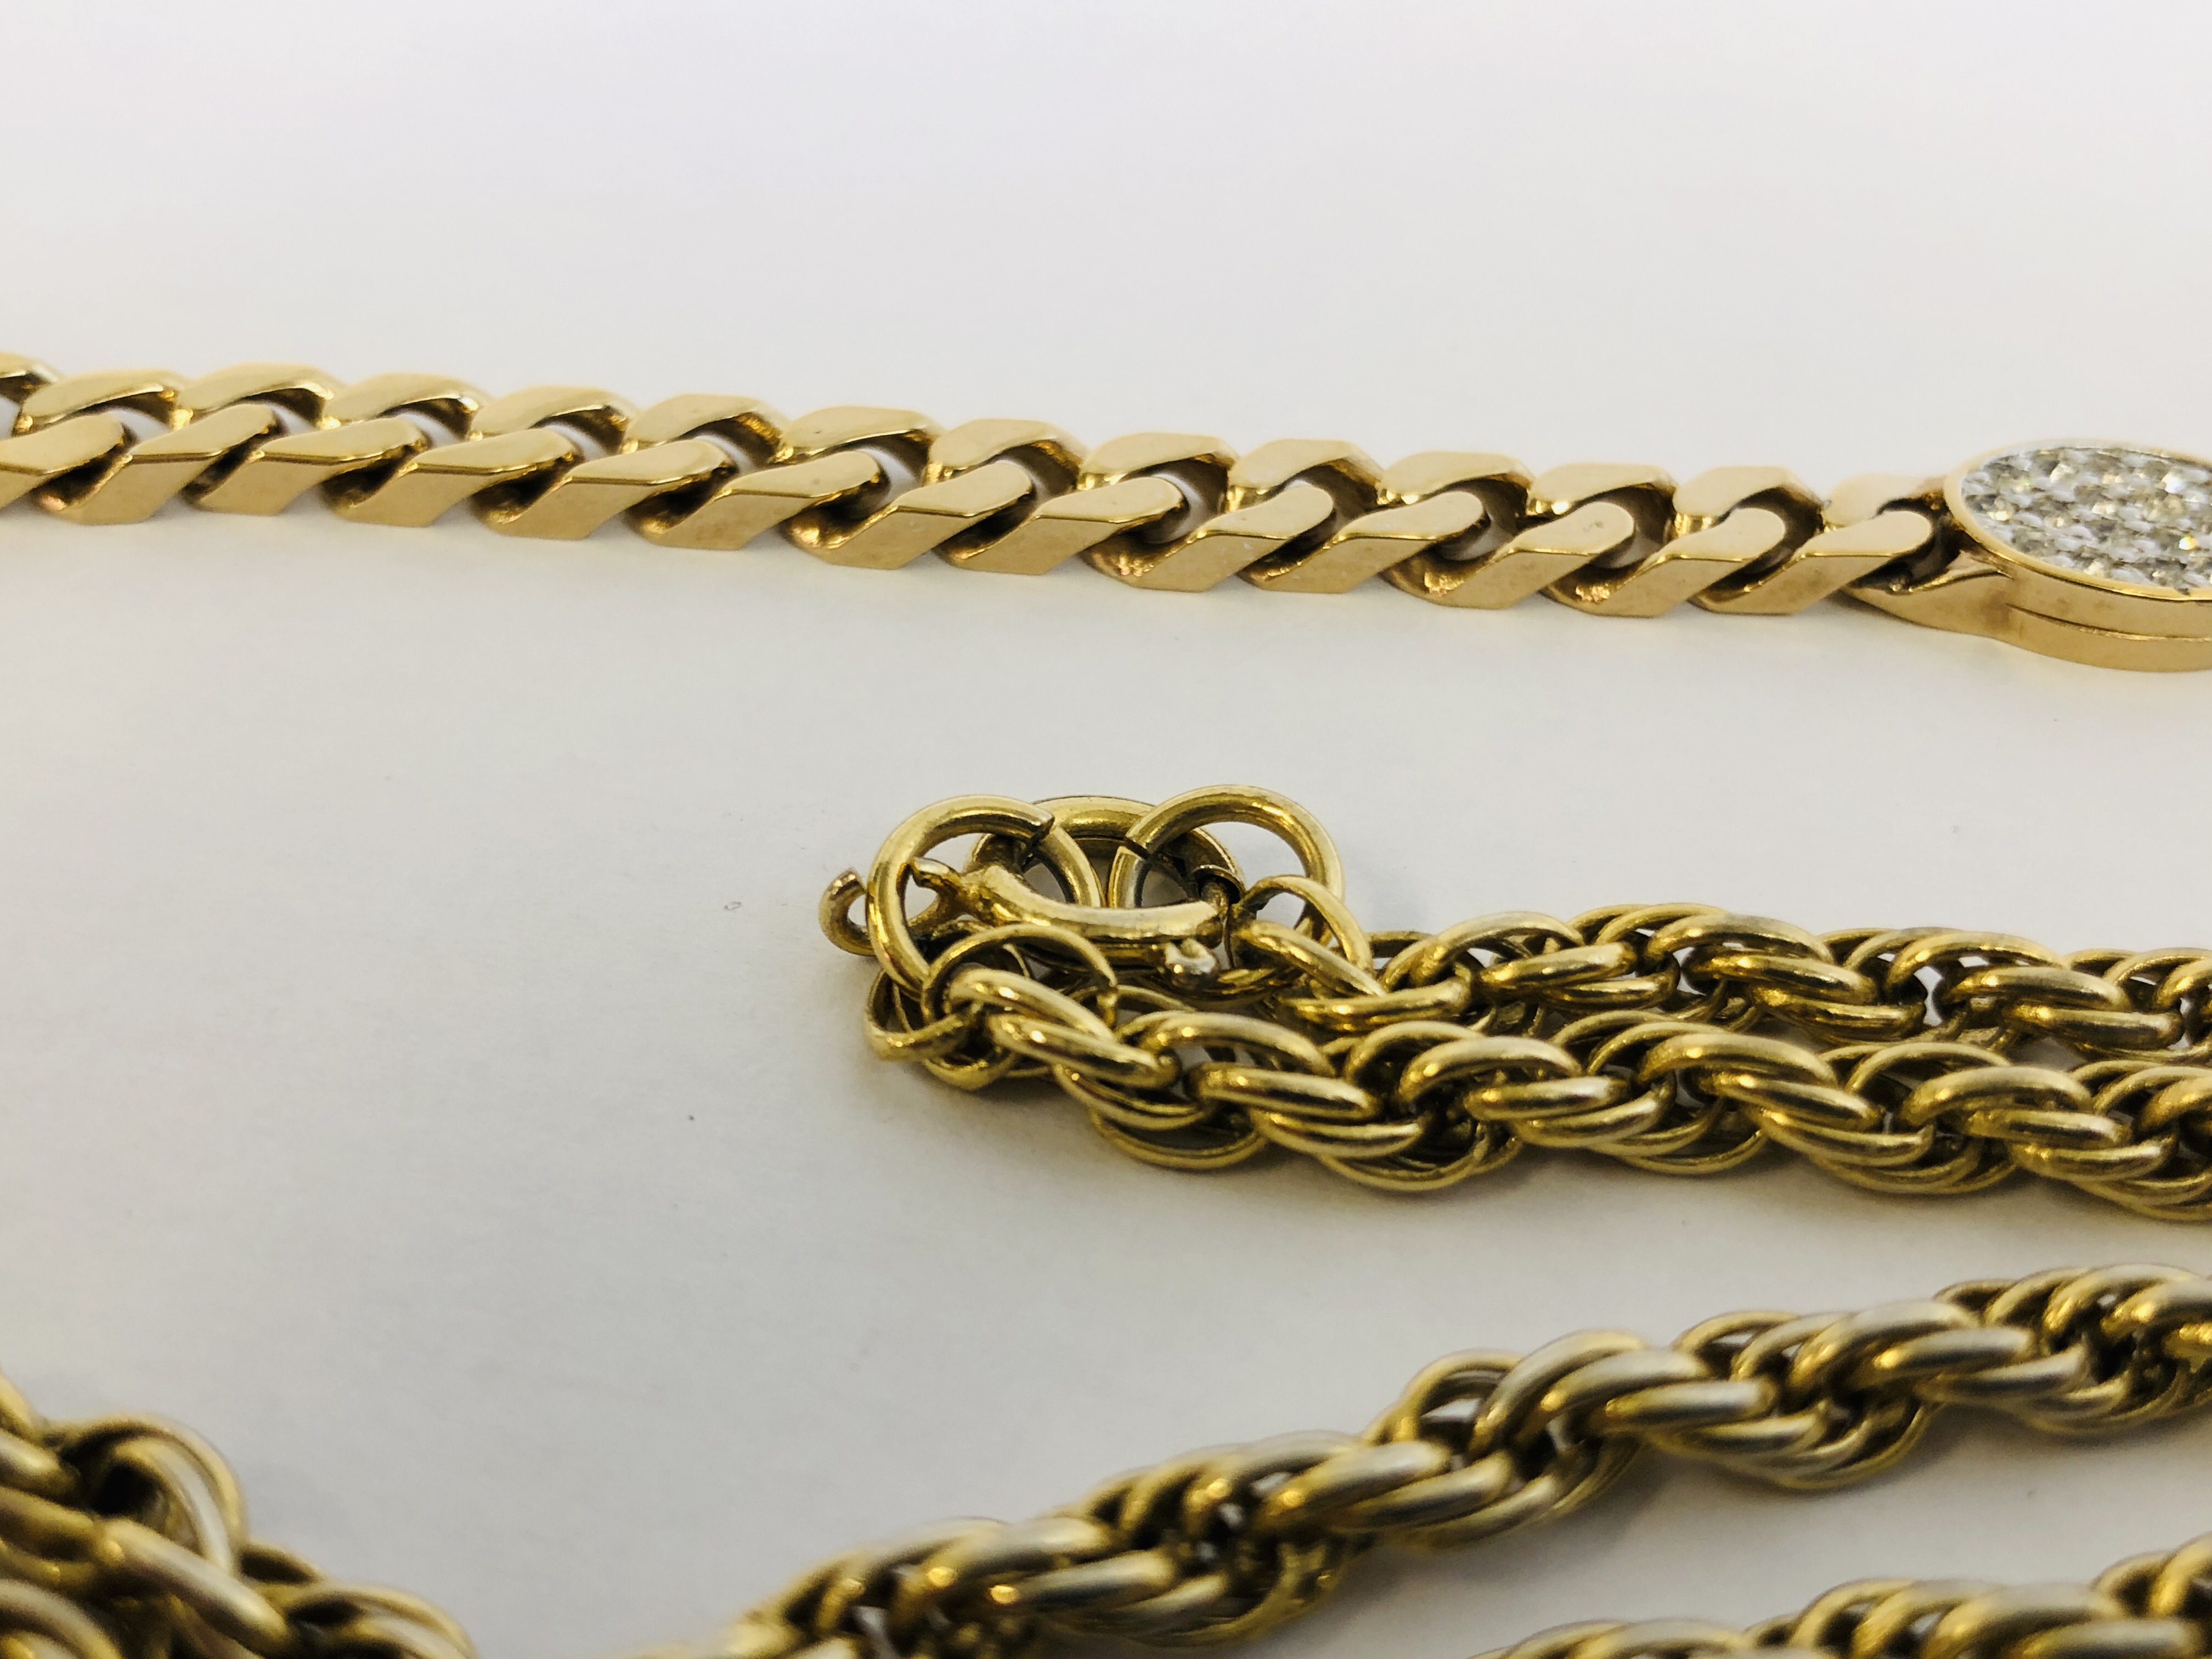 A GOLD TONE COSTUME BRACELET MARKED "PANETTA" ALONG WITH AN UNMARKED ROPE TWIST NECKLACE. - Image 4 of 13